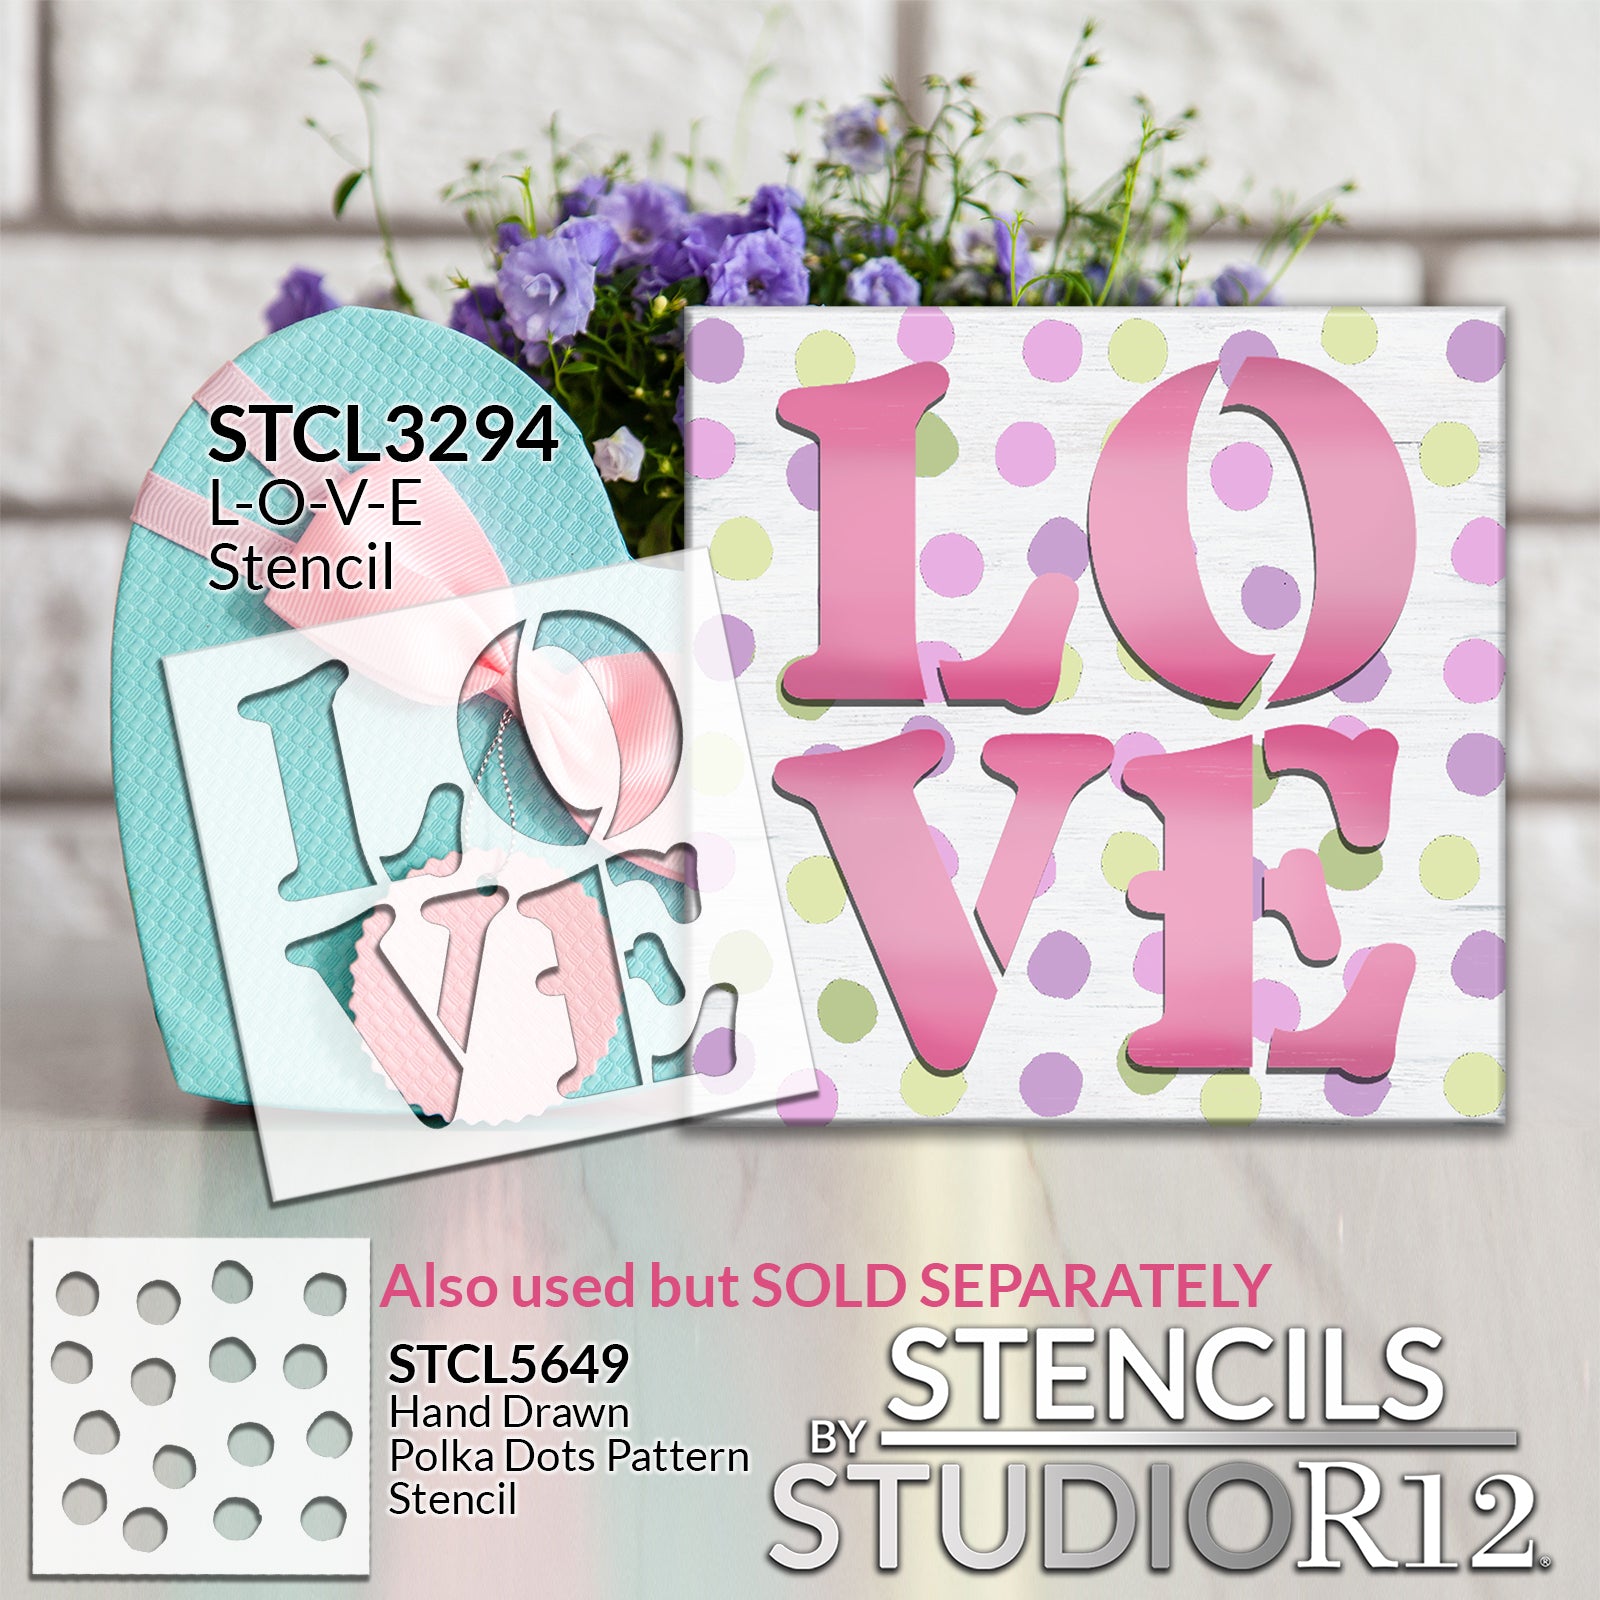 Valentine Lettering (Printable Love Font with Hearts) – DIY Projects,  Patterns, Monograms, Designs, Templates